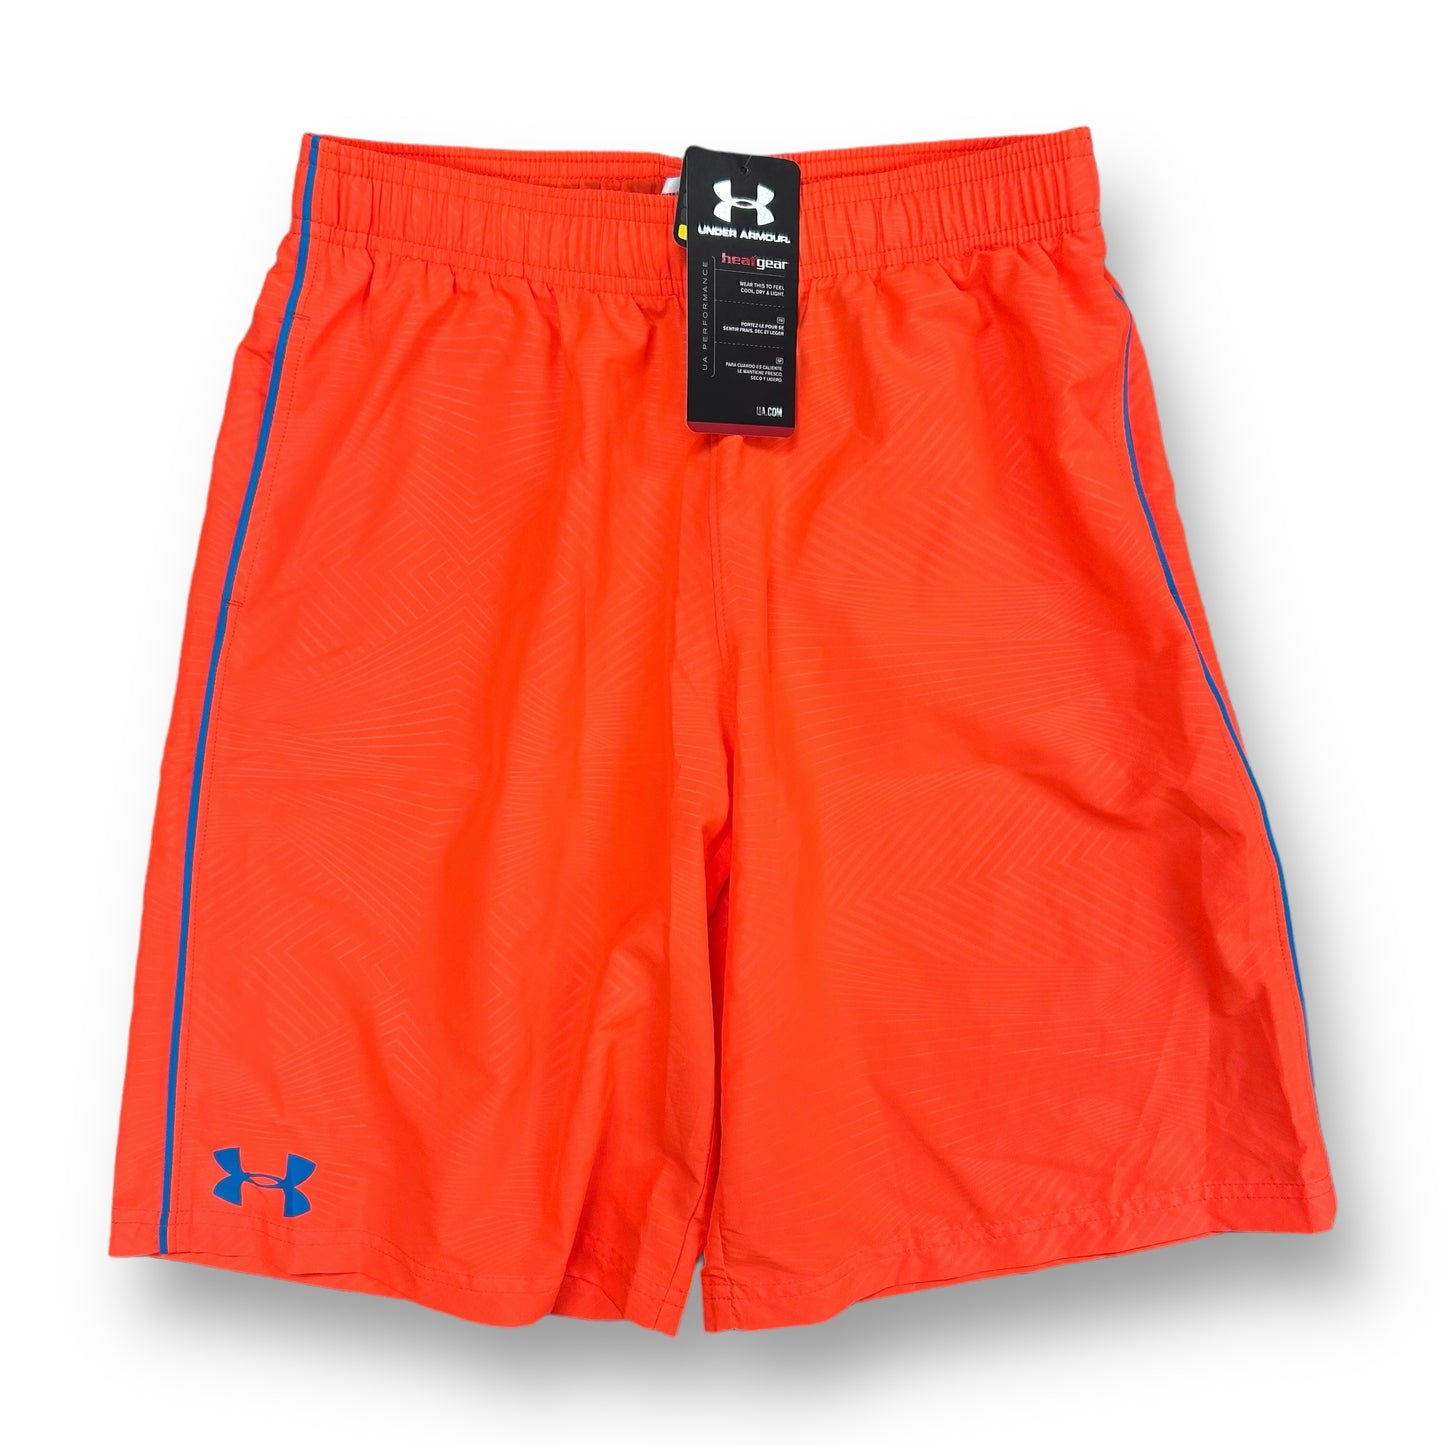 NEW! Boys Under Armour Size YLG 12/14  Bright Orange Loose Fit Athletic Shorts